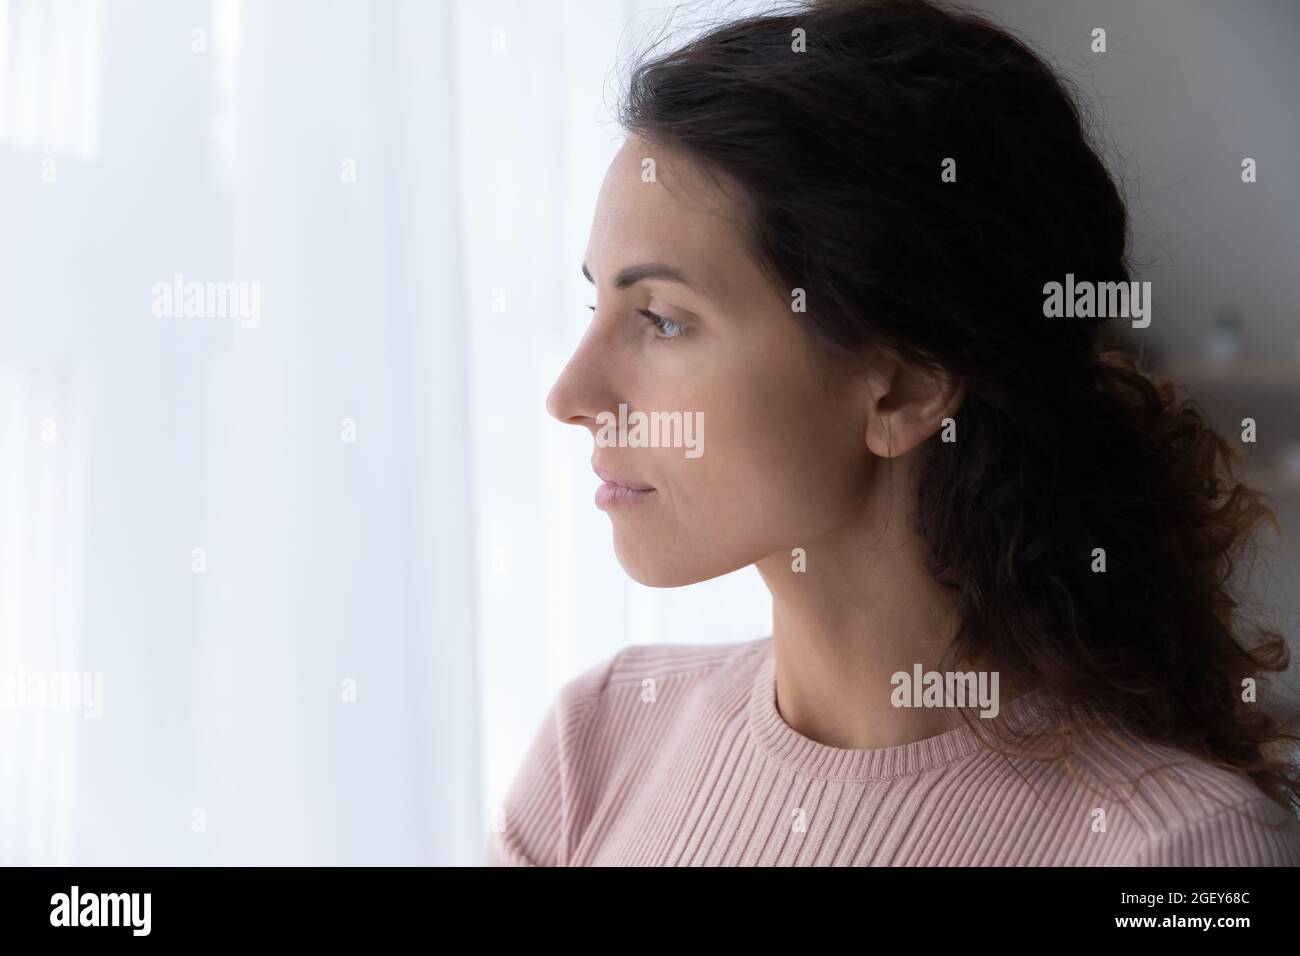 Closeup face of serious Hispanic woman looks out the window Stock Photo